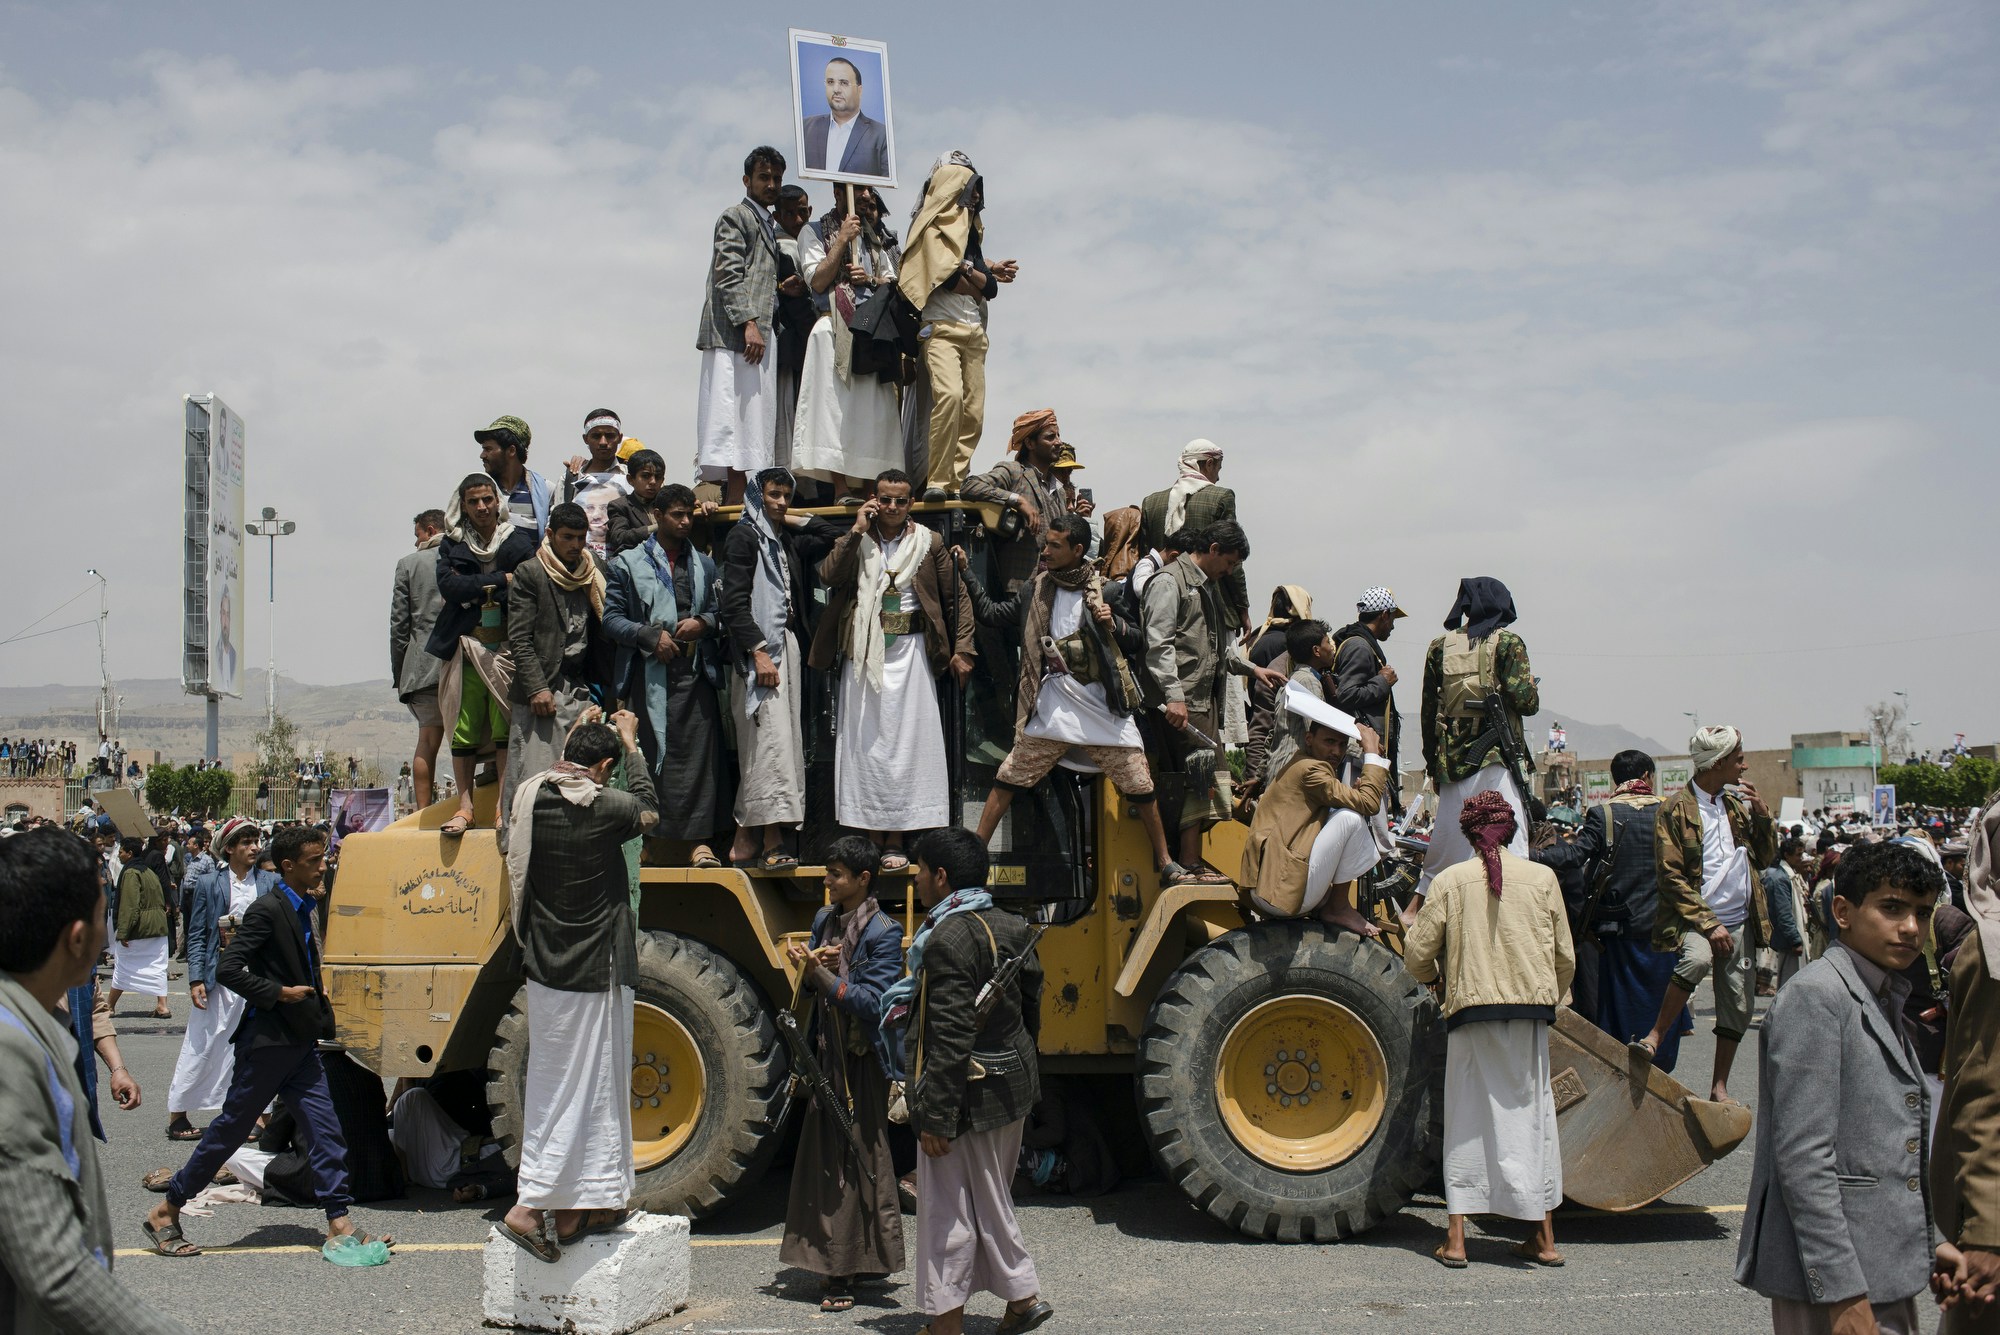 Supporters of the Houthis gather for prayer and the funeral of Salah al Samad, a Houthi political leader who was killed in an airstrike, April 28 in Sana'a, Yemen